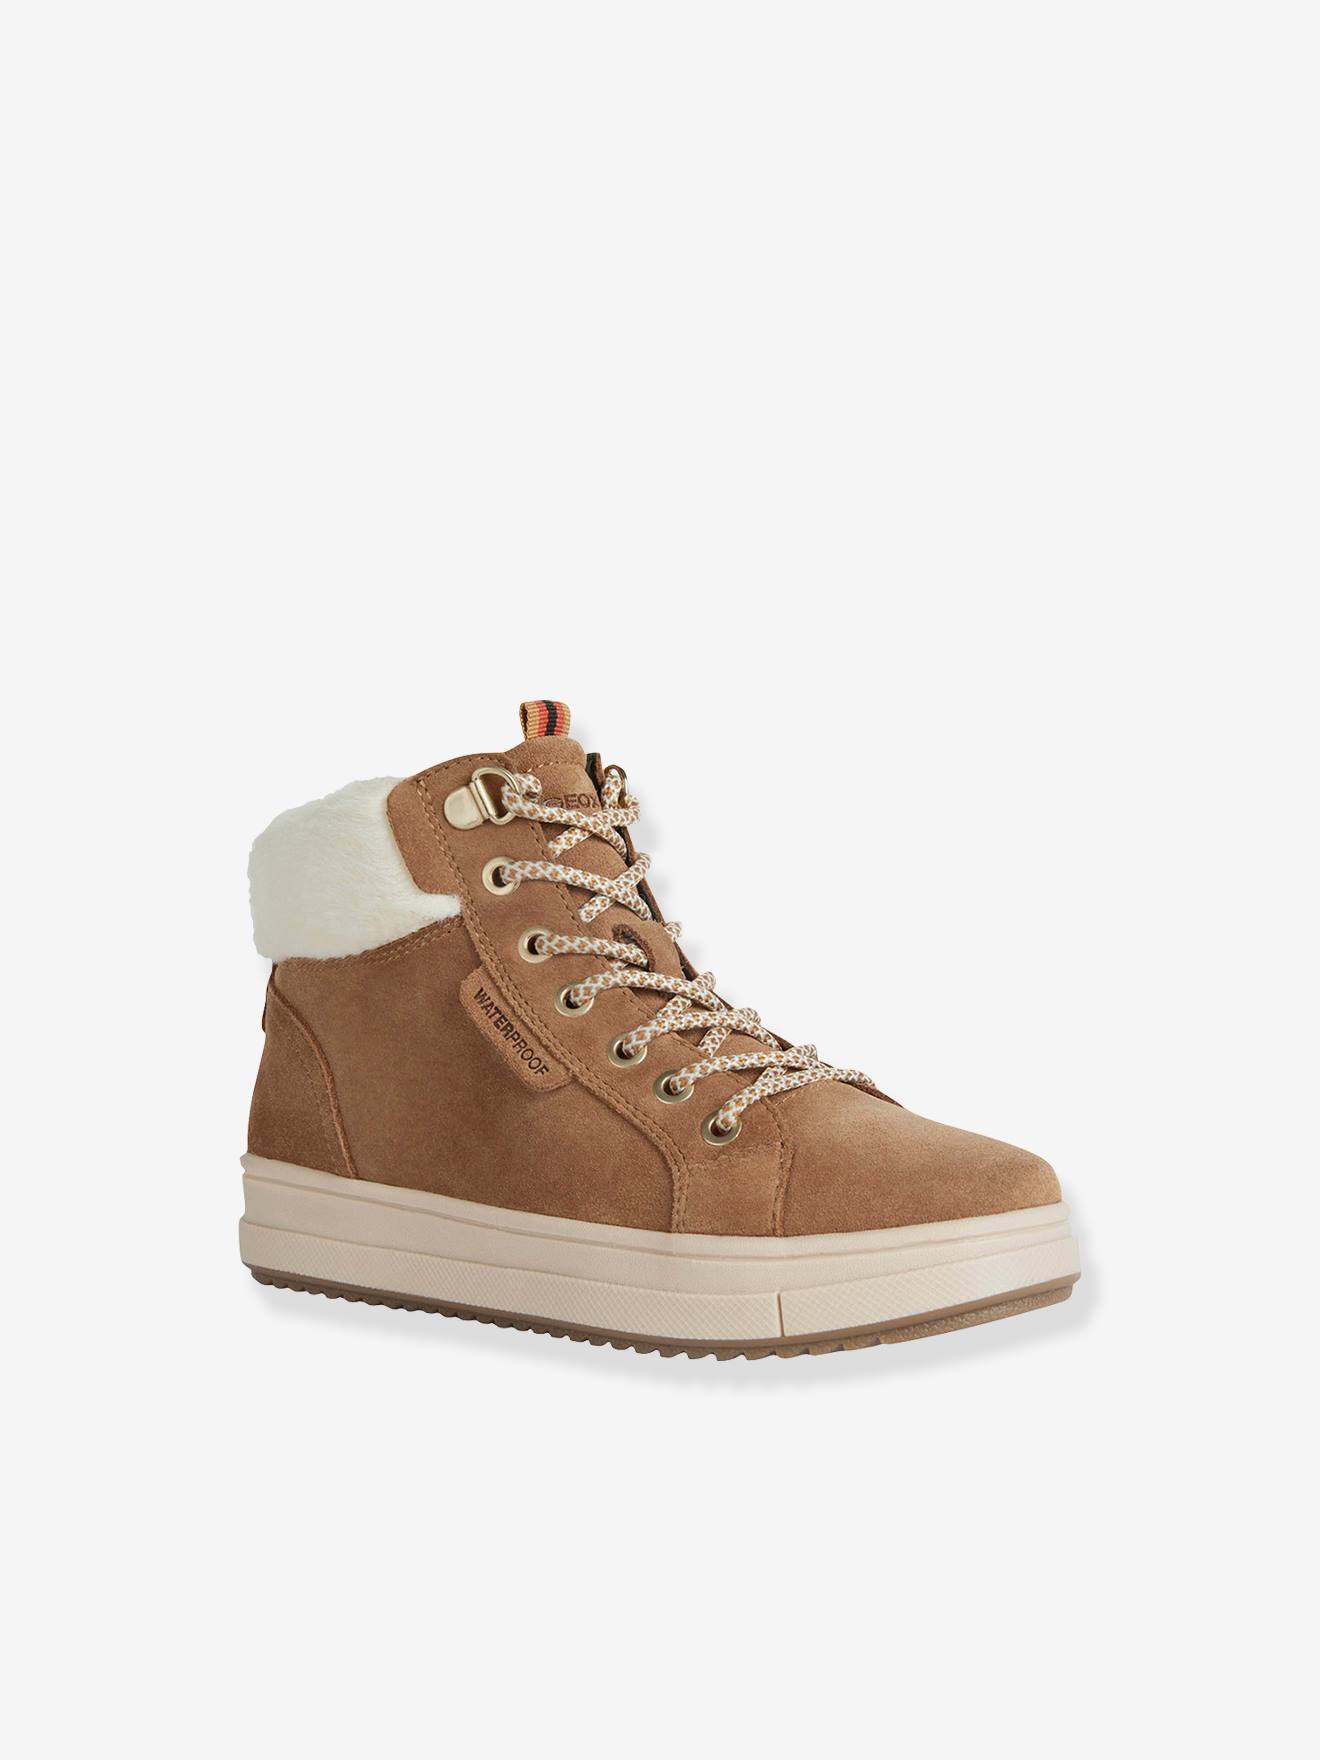 Trainers for Girls, Rebecca WPF by GEOX(r) camel